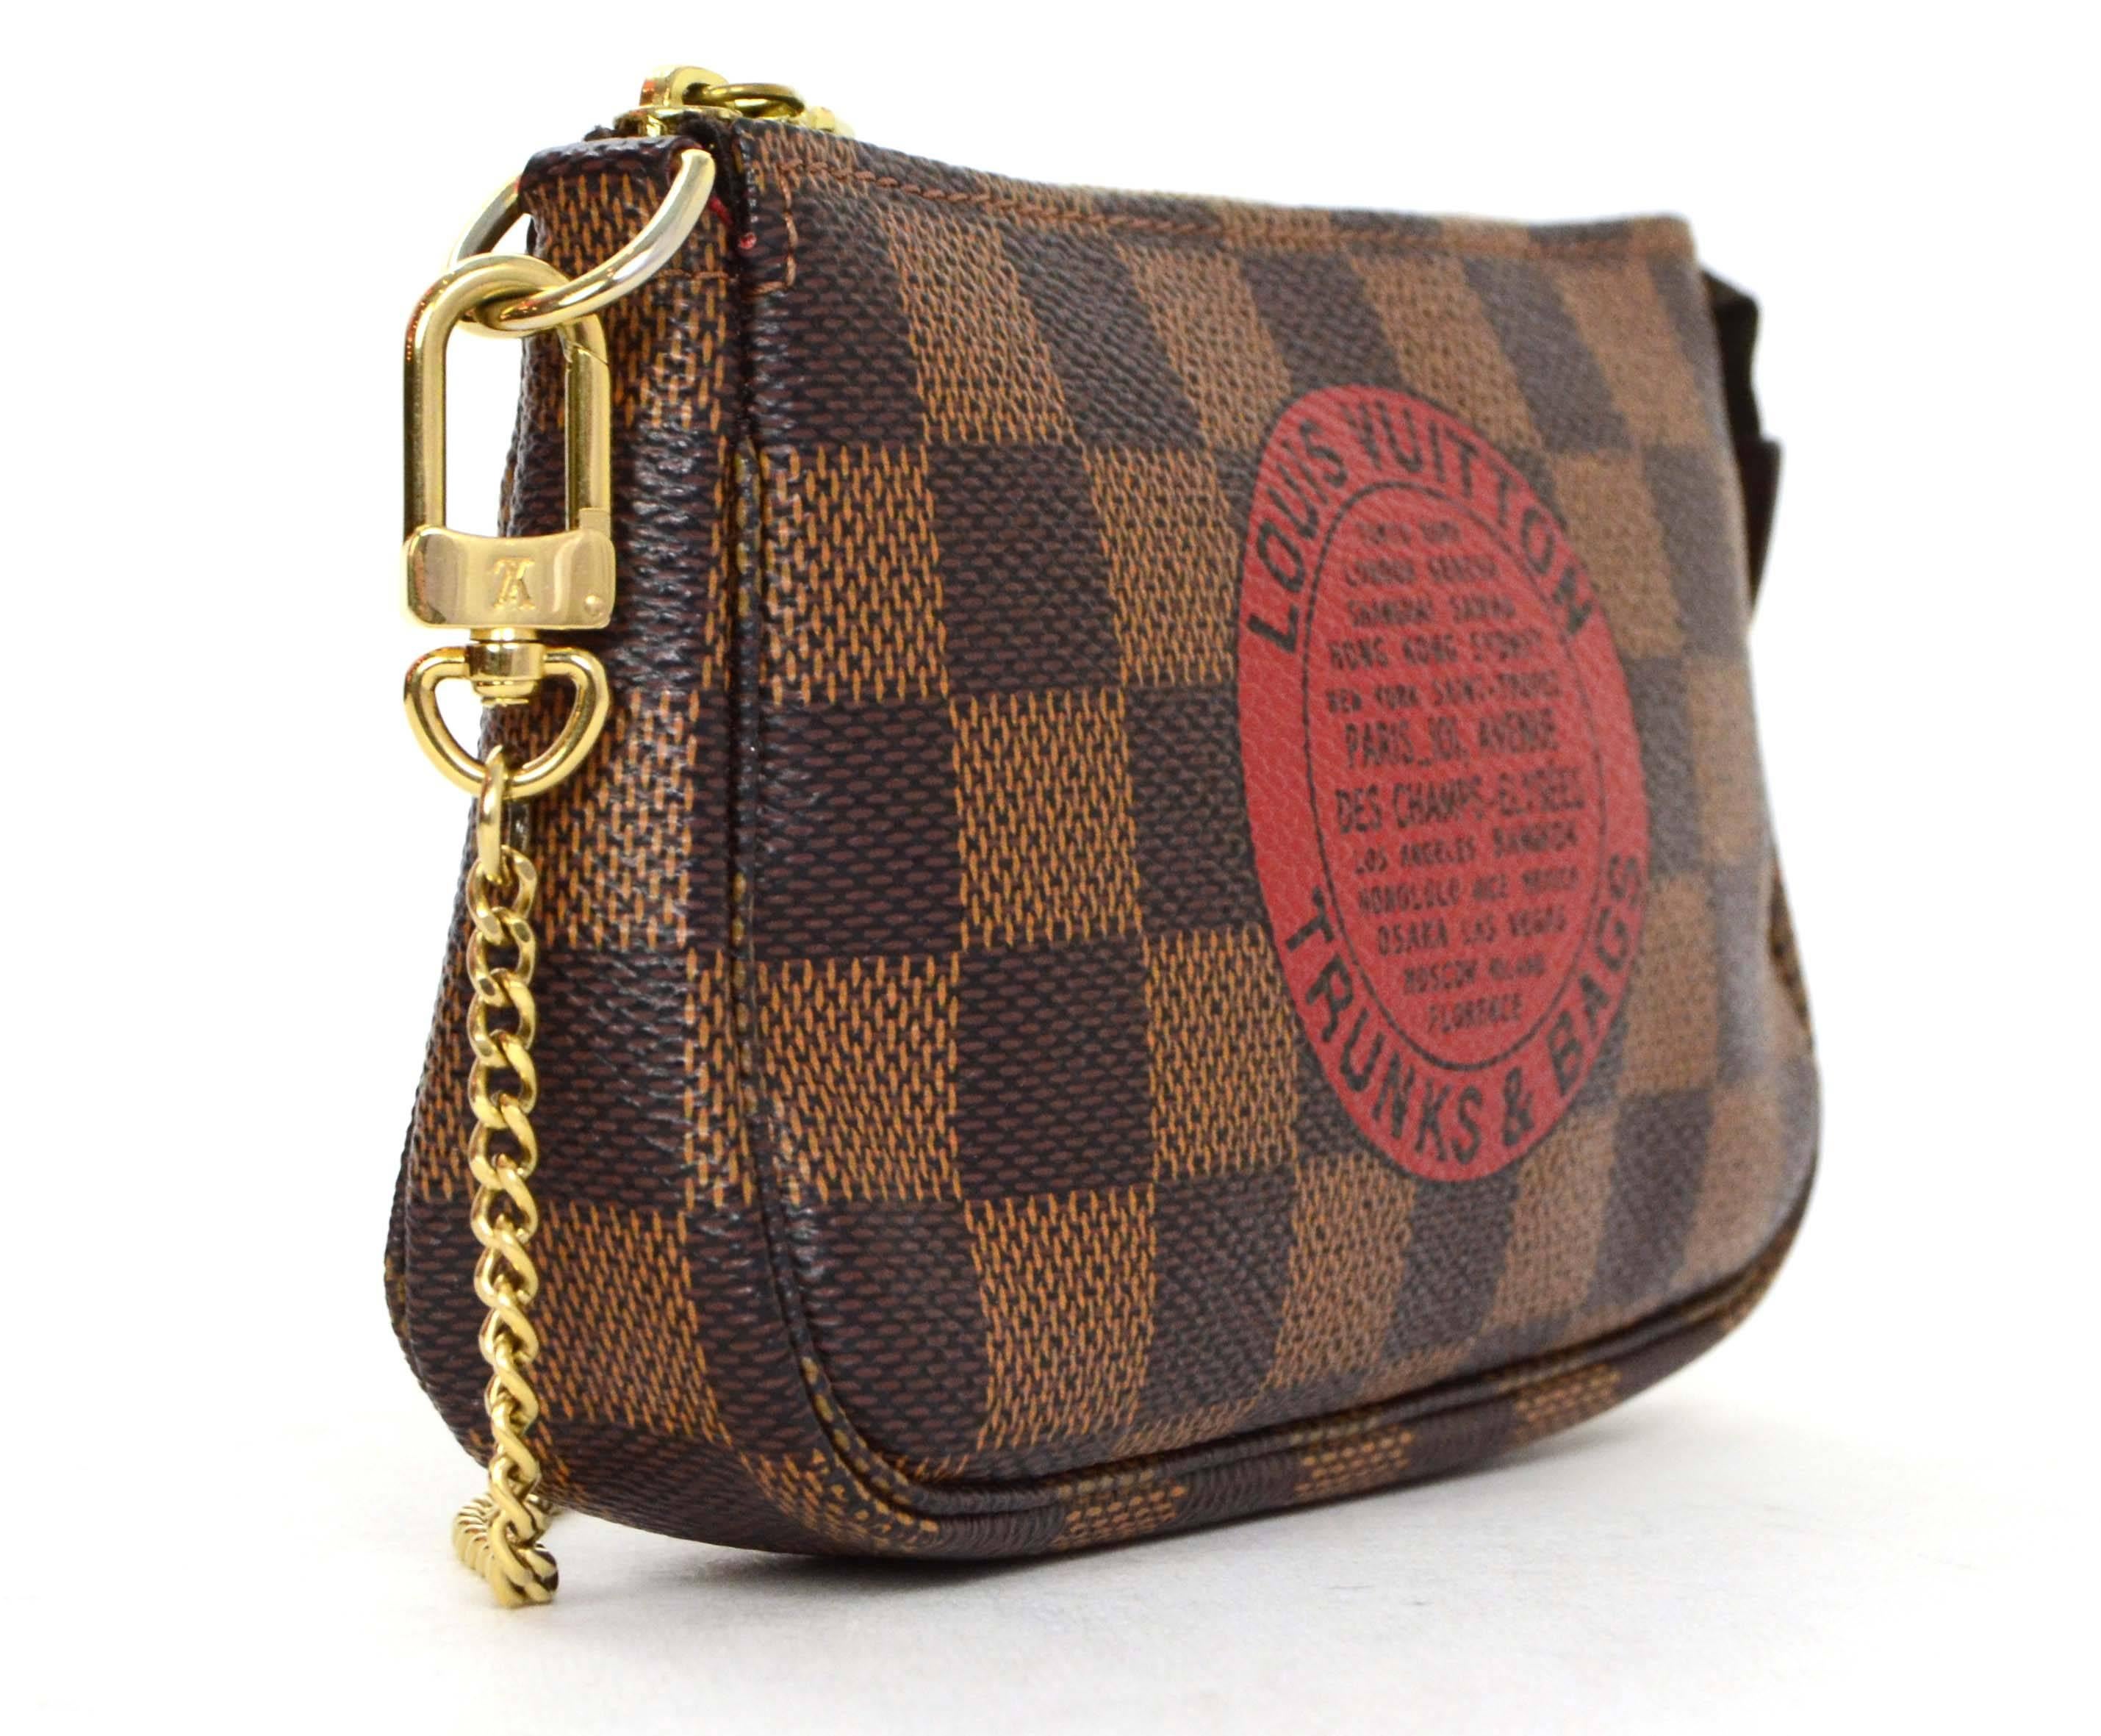 Louis Vuitton Collectors Damier Trunks & Bags Mini Pochette
Features detachable chain handle that can be clipped into a handbag

    Made In: France

    Year of Production: 2009

    Color: Damier Ebene

    Hardware: Goldtone

   